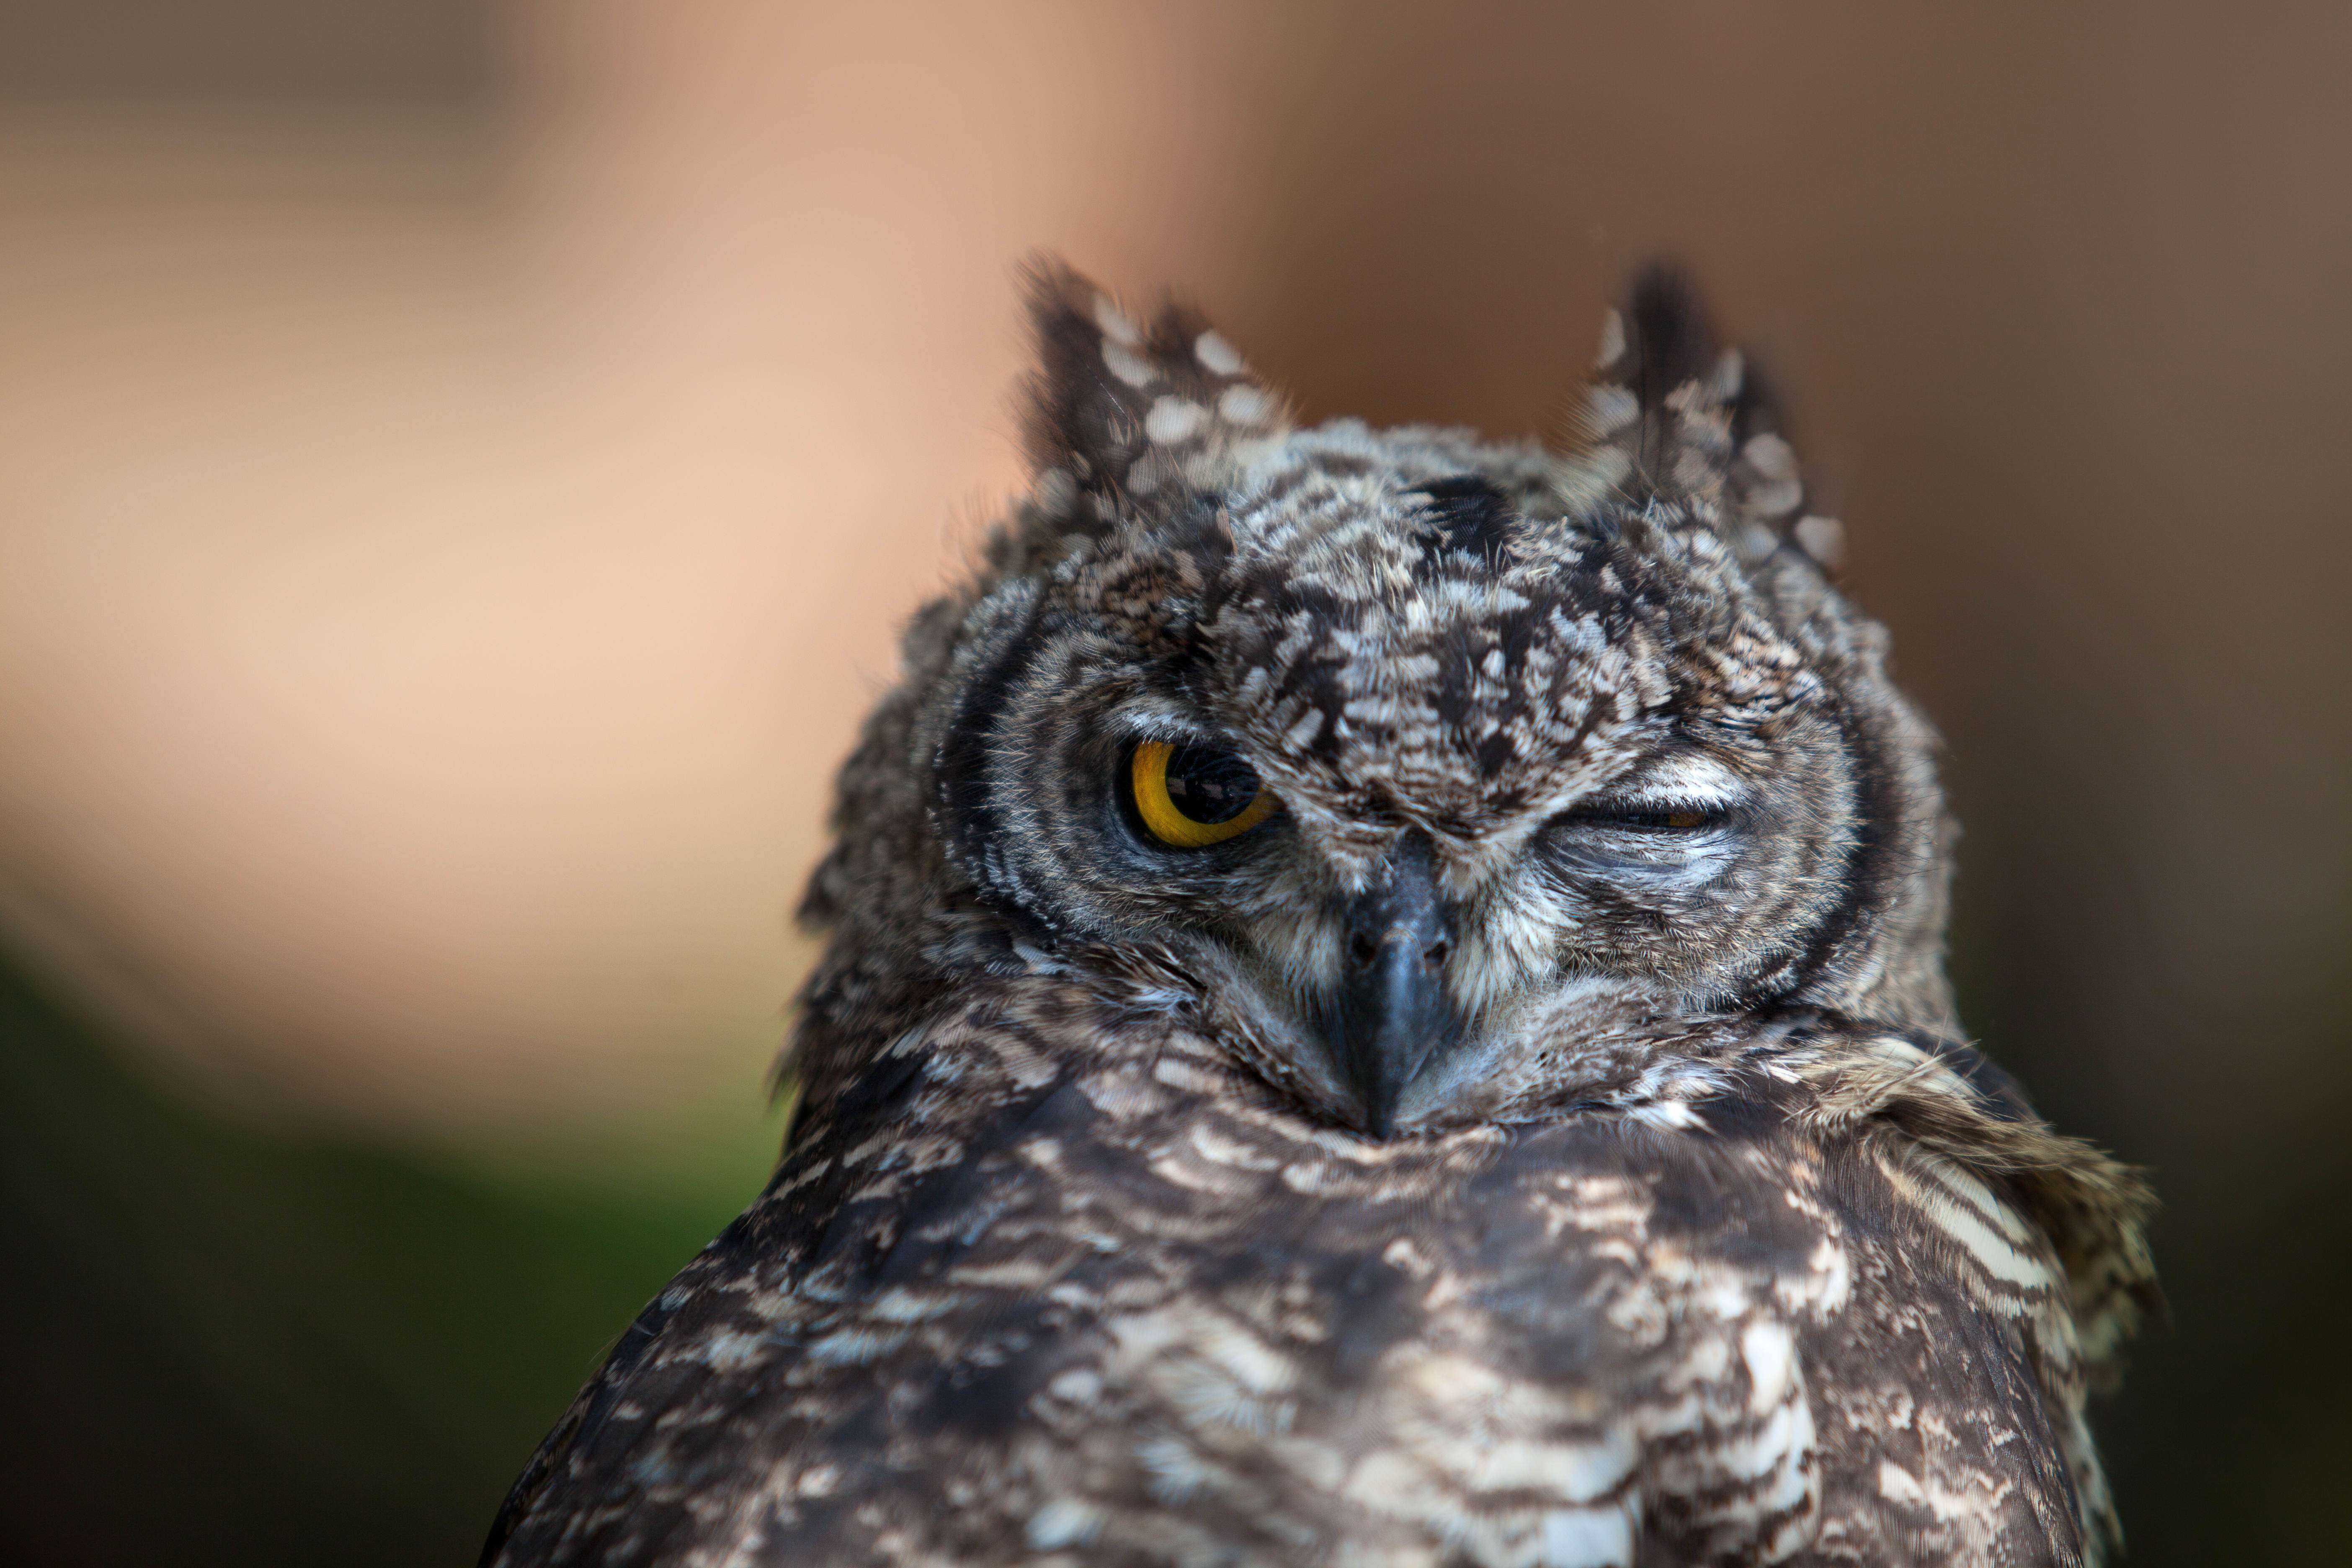 57079 download wallpaper bird, animals, owl, eyes, predator screensavers and pictures for free